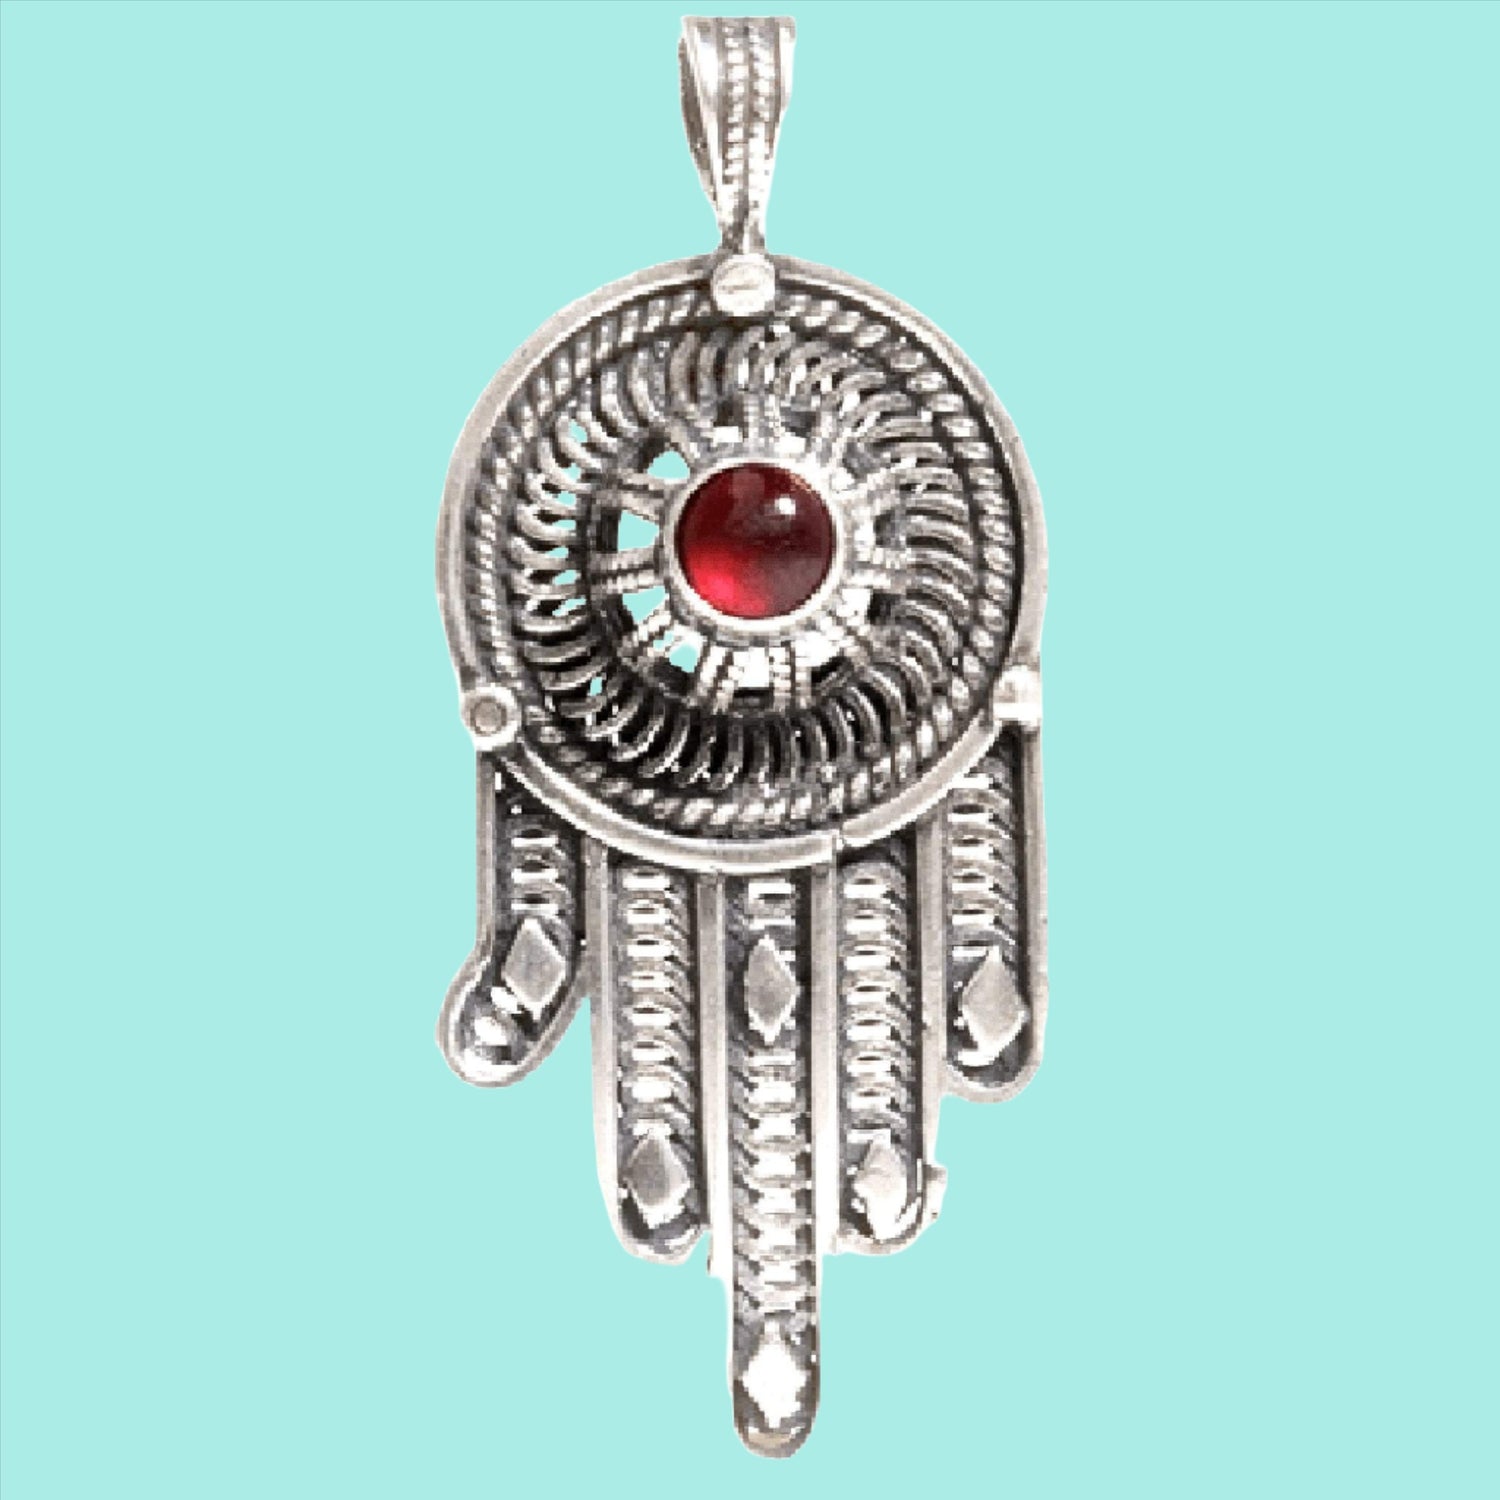 Bluenoemi Jewelry Necklaces Bluenoemi Israeli Sterling Silver Chain and Pendant  Necklace for Woman. Hamsa Pendant Necklace set with Gemstones.